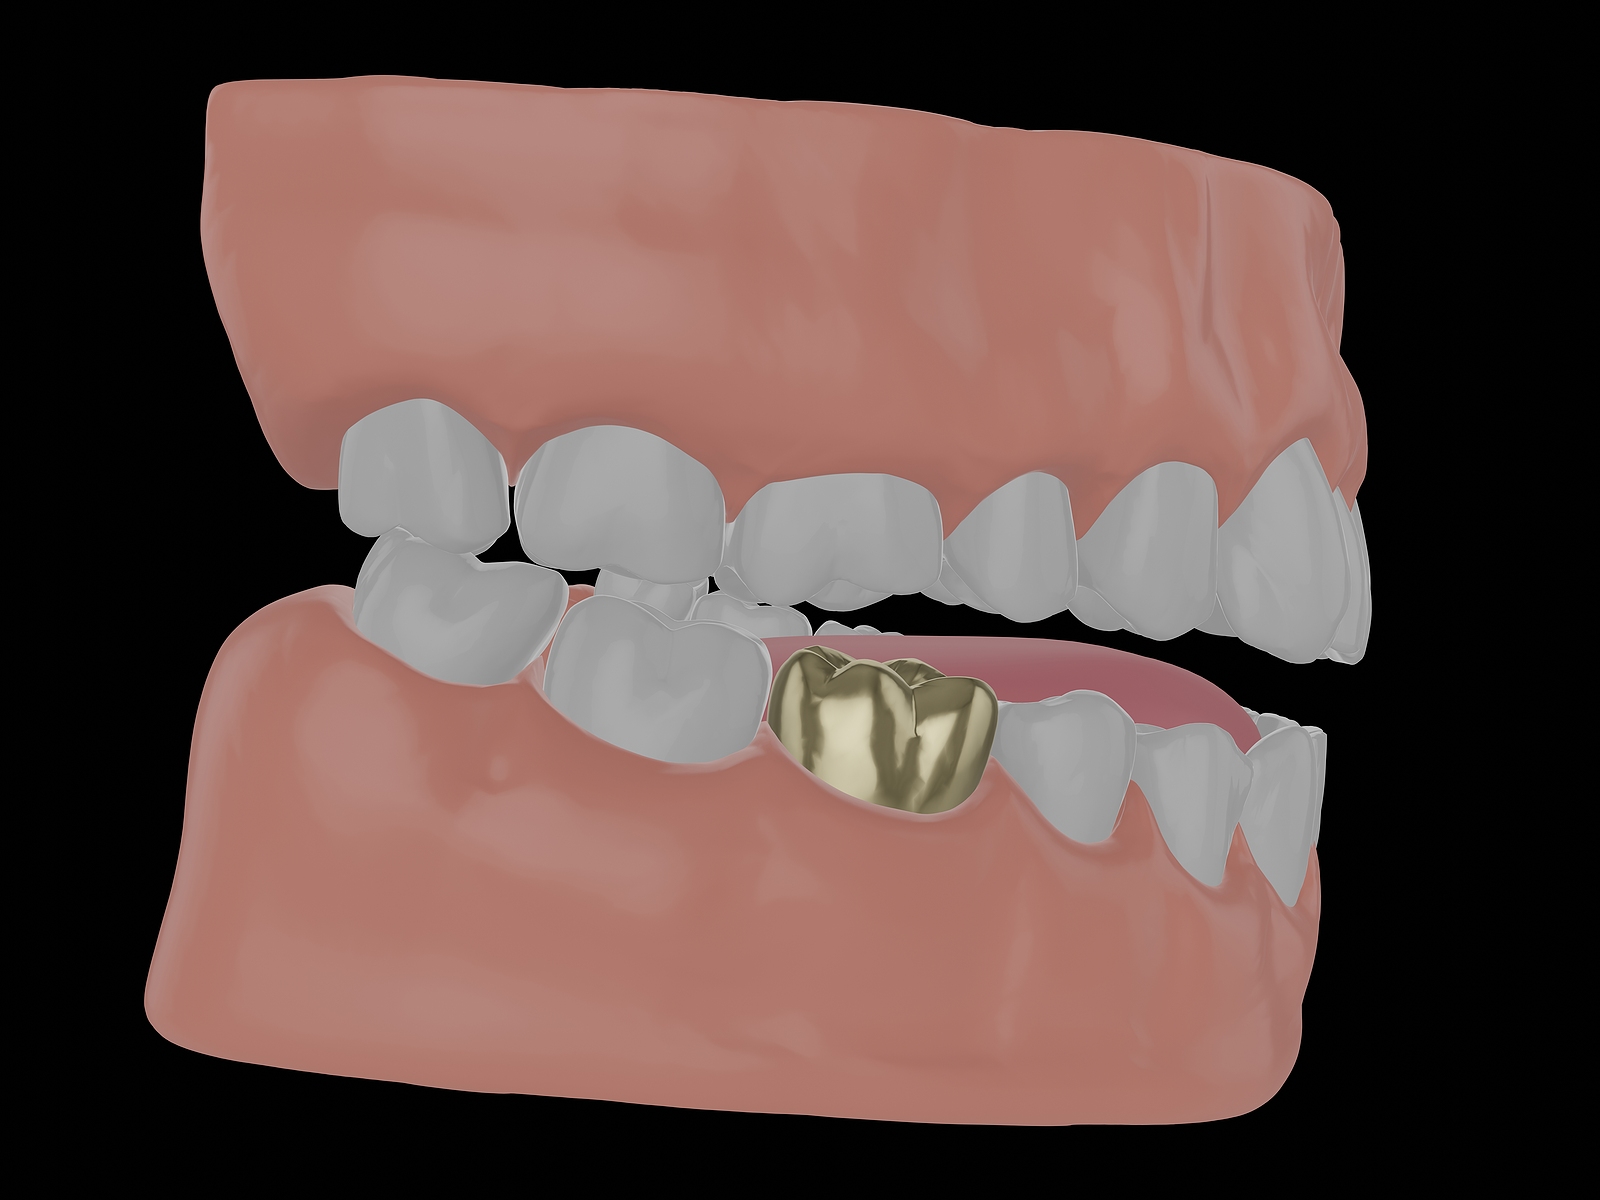 Partial Coverage or Full Coverage: What Is Best for Your Tooth